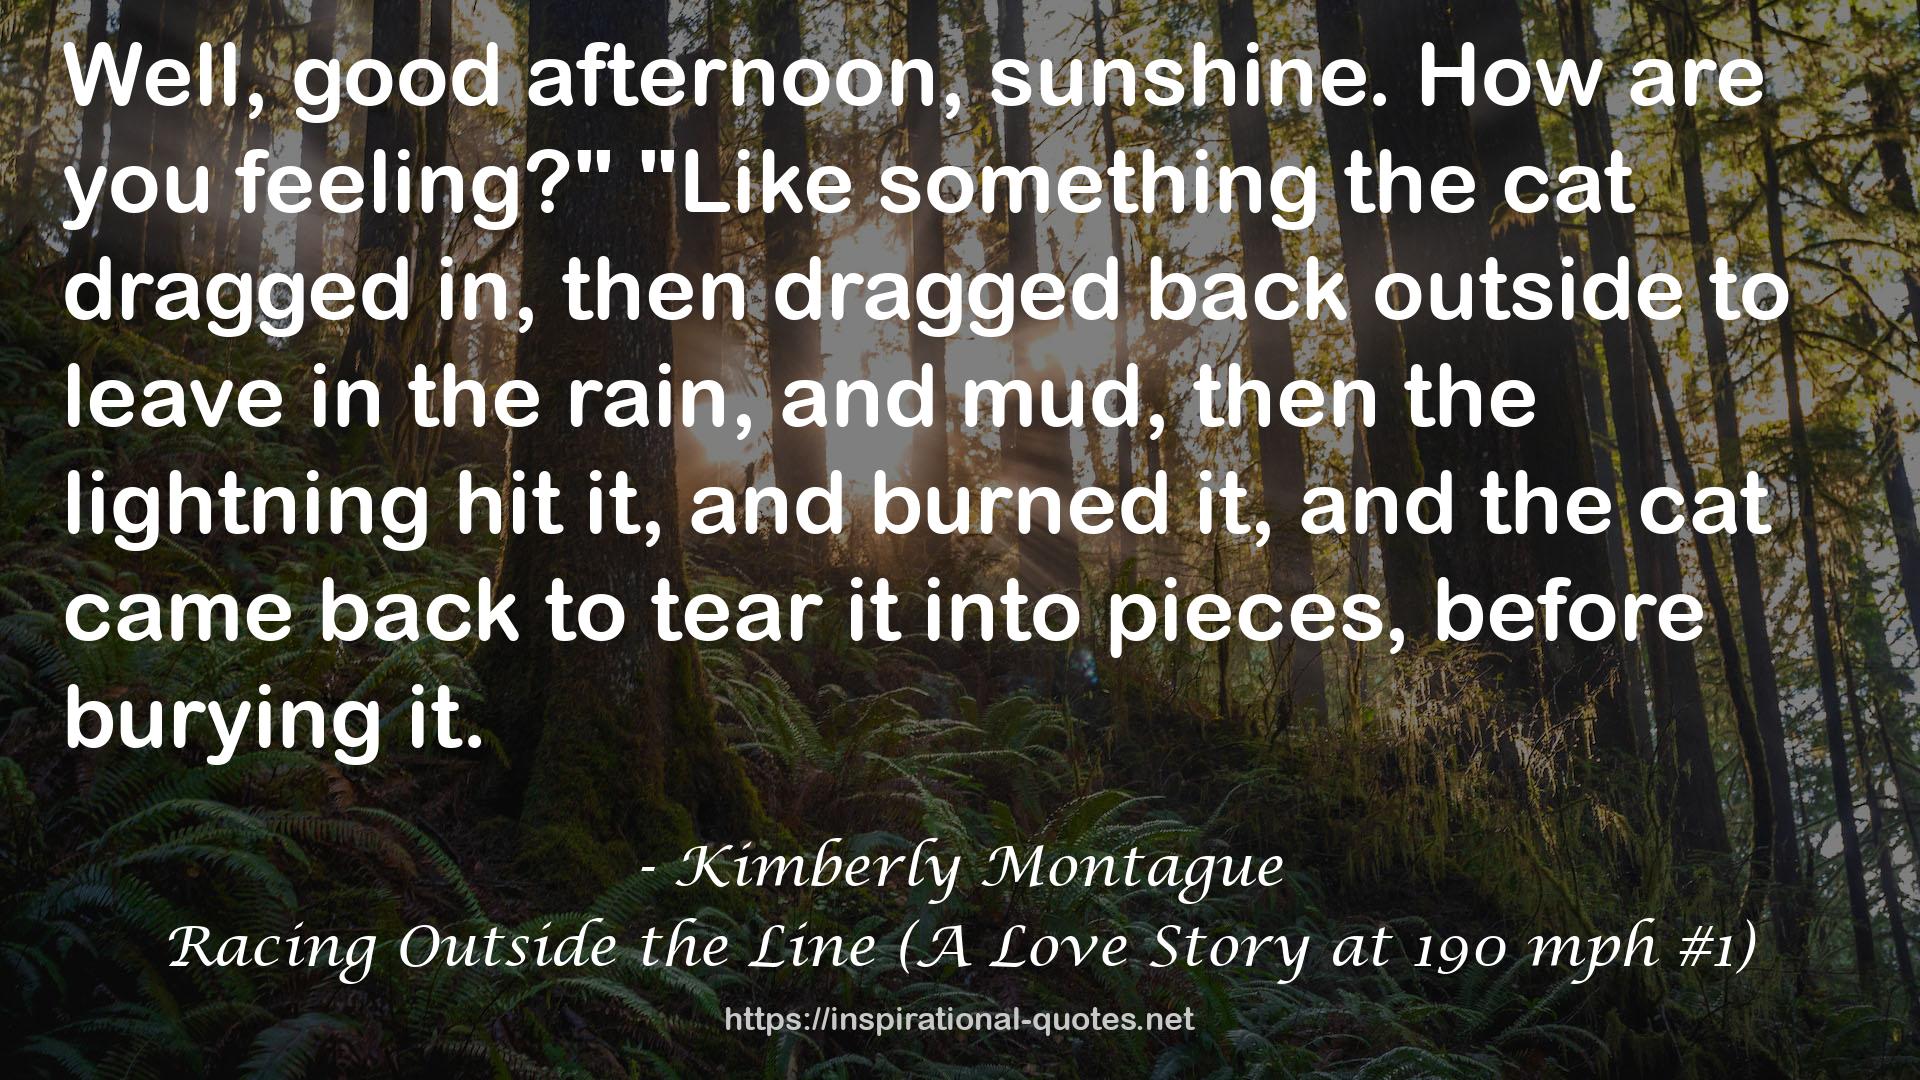 Racing Outside the Line (A Love Story at 190 mph #1) QUOTES